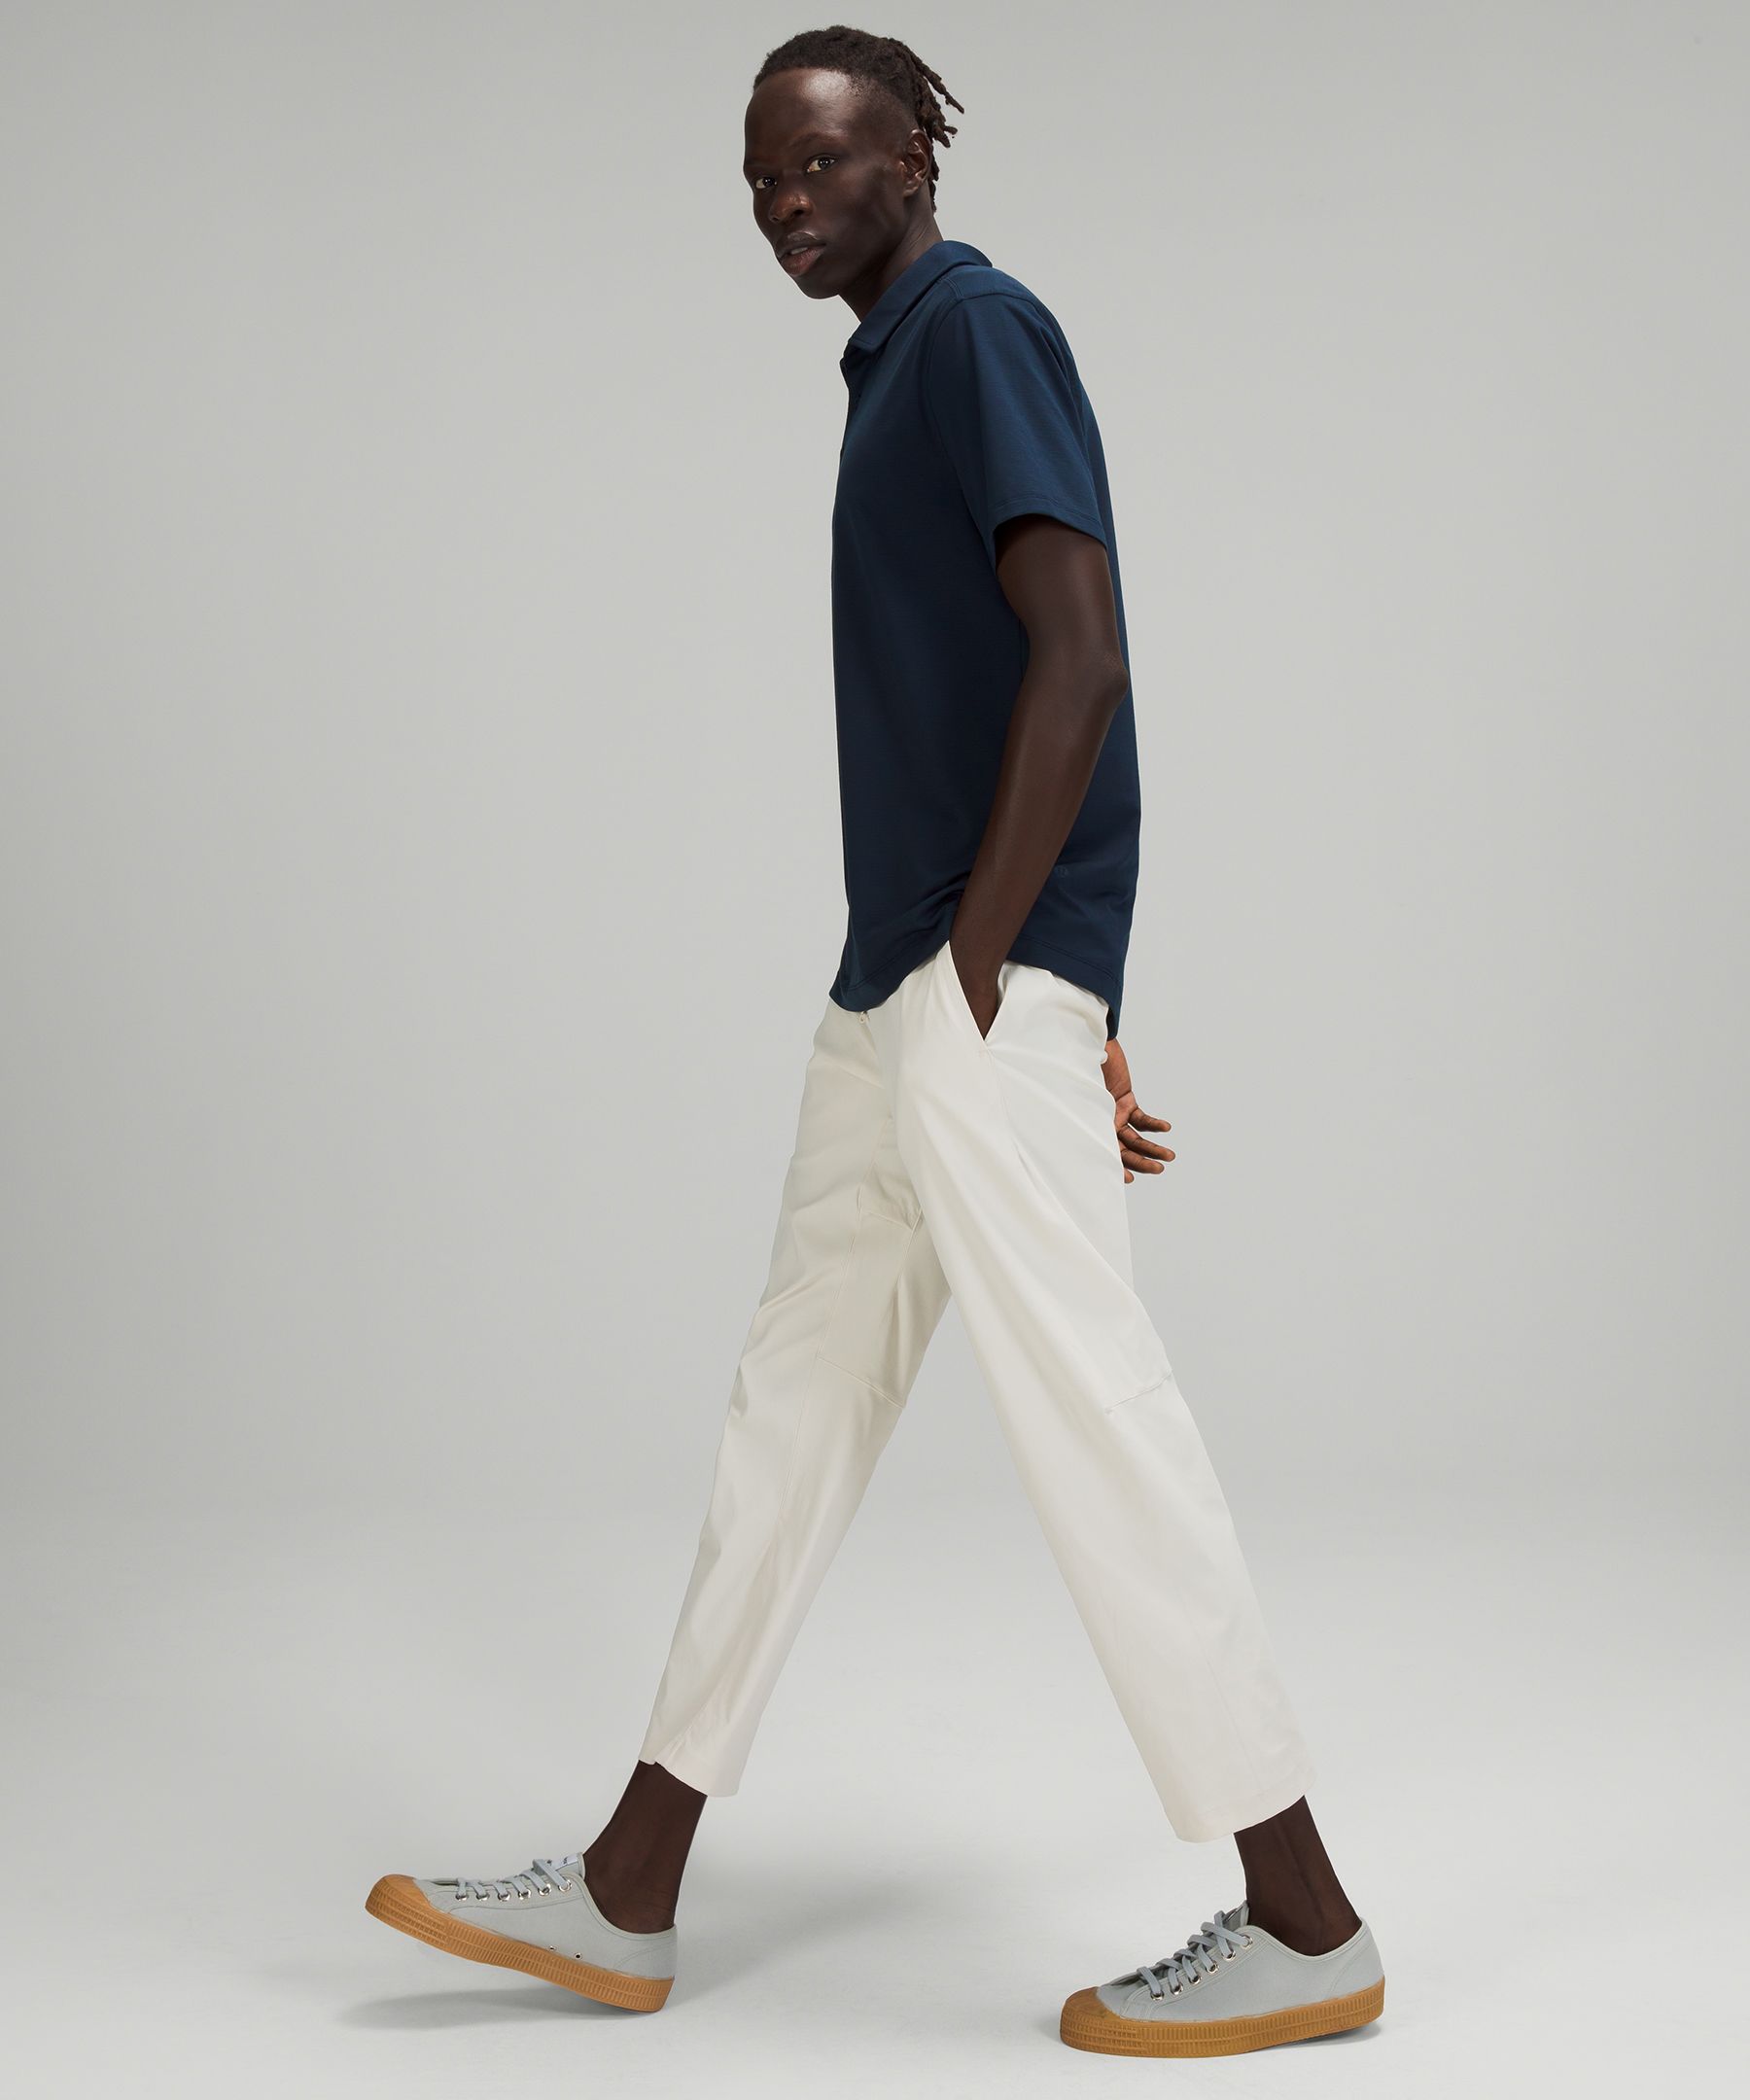 Men's On The Move Clothes | lululemon